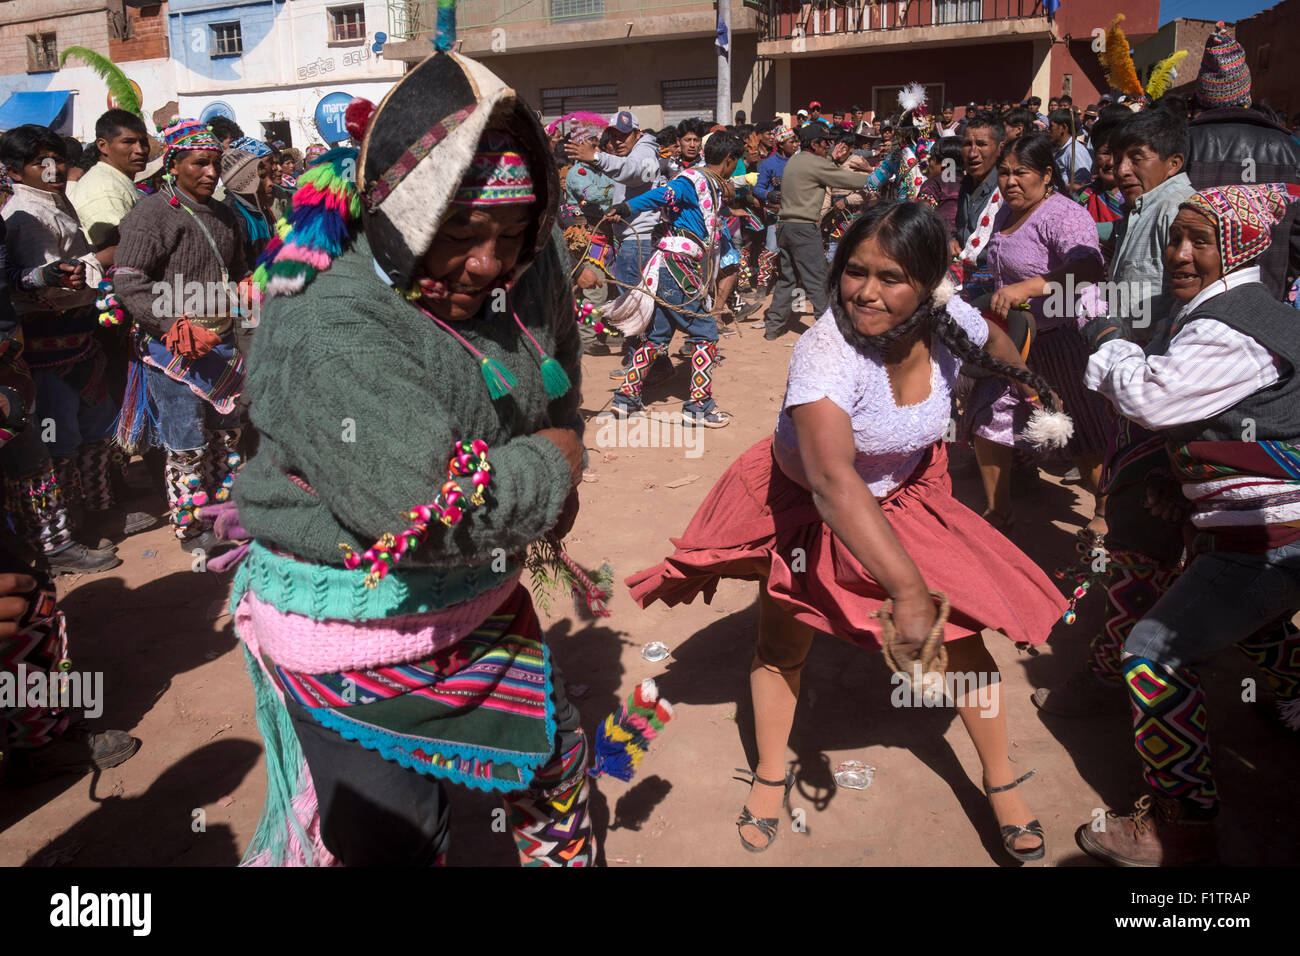 During the celebration of Tinku, fights start among the attendees, either individually or in a group fighting. Stock Photo